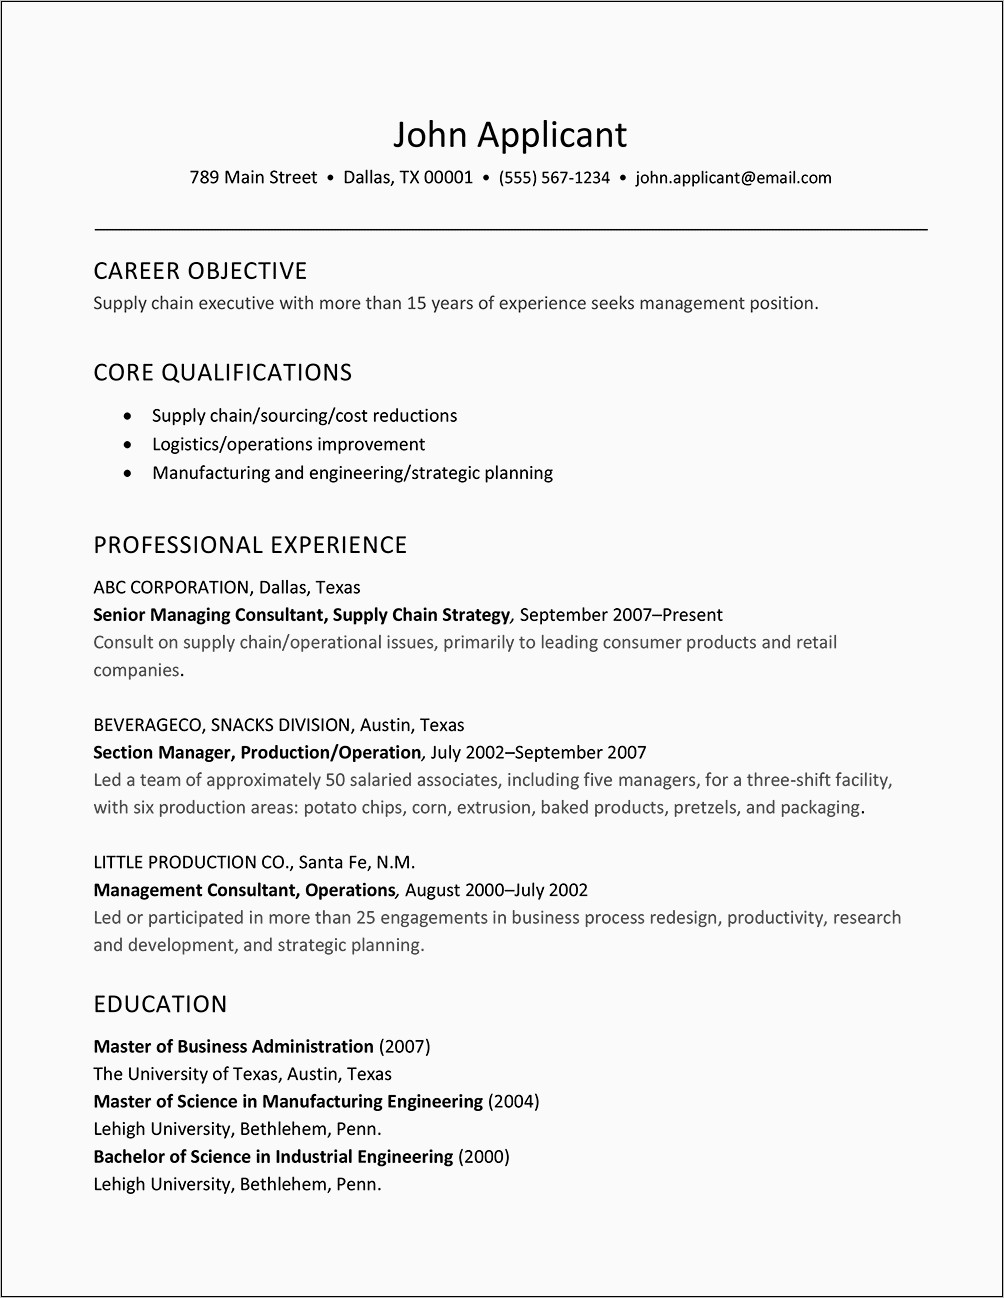 Resume Career Examples Logistics Manager